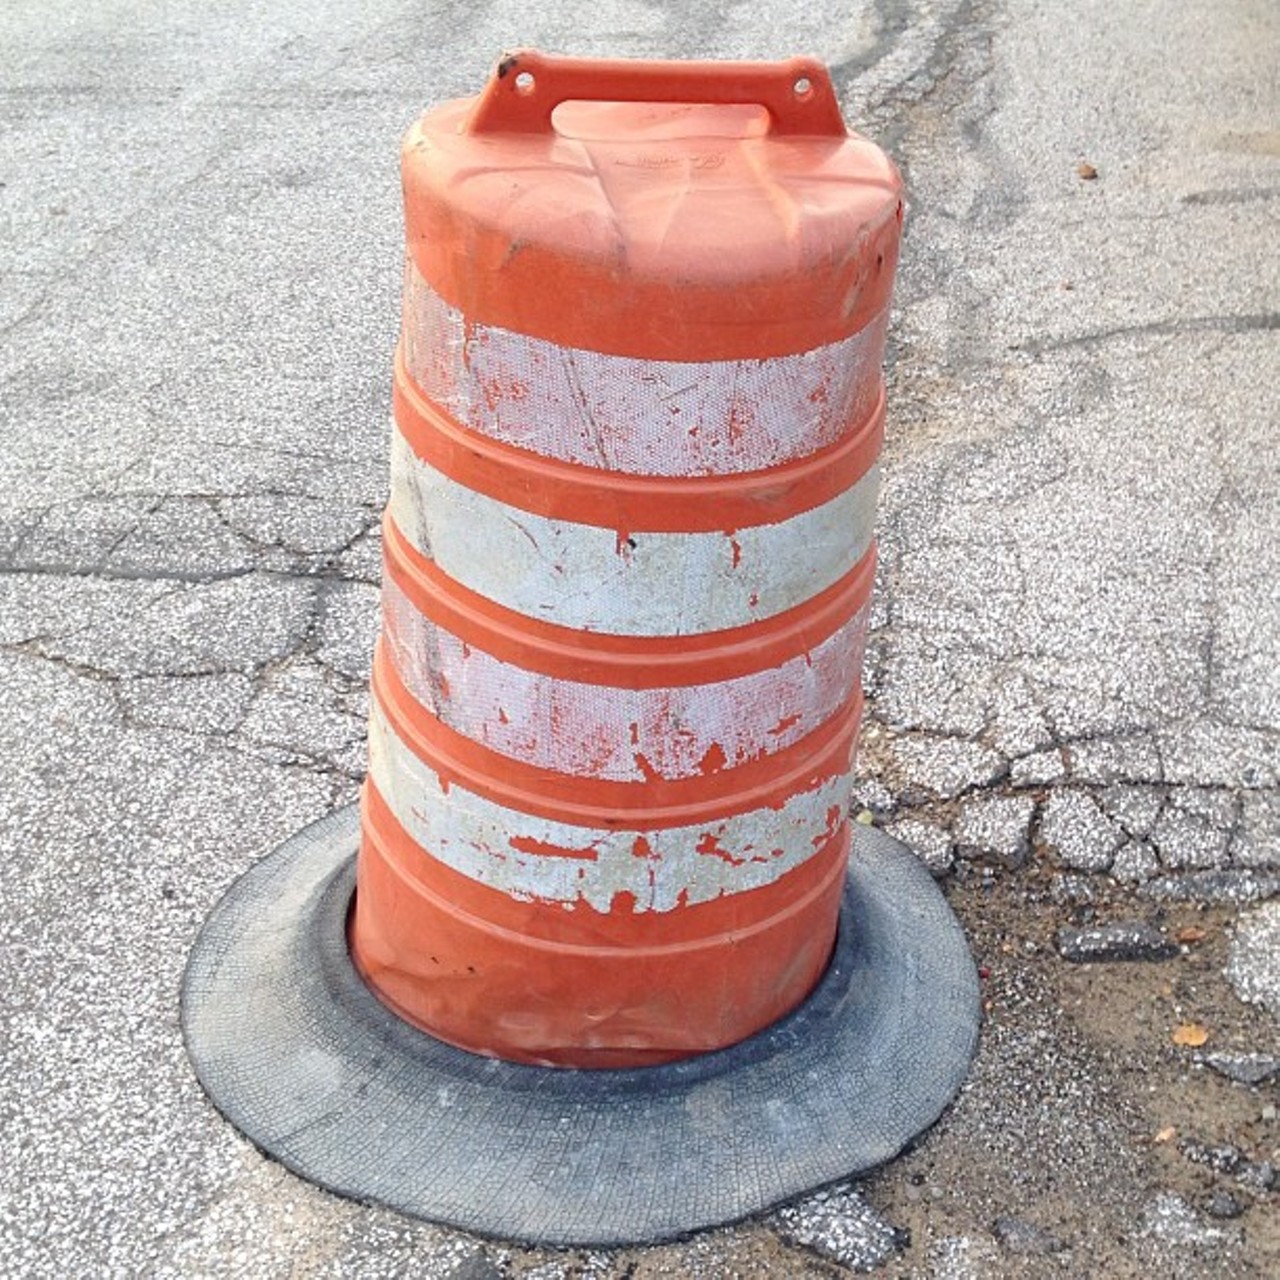 Instead of filling in the pothole the city of Cleveland decided to put a construction barrel over it. #clevelandproblems